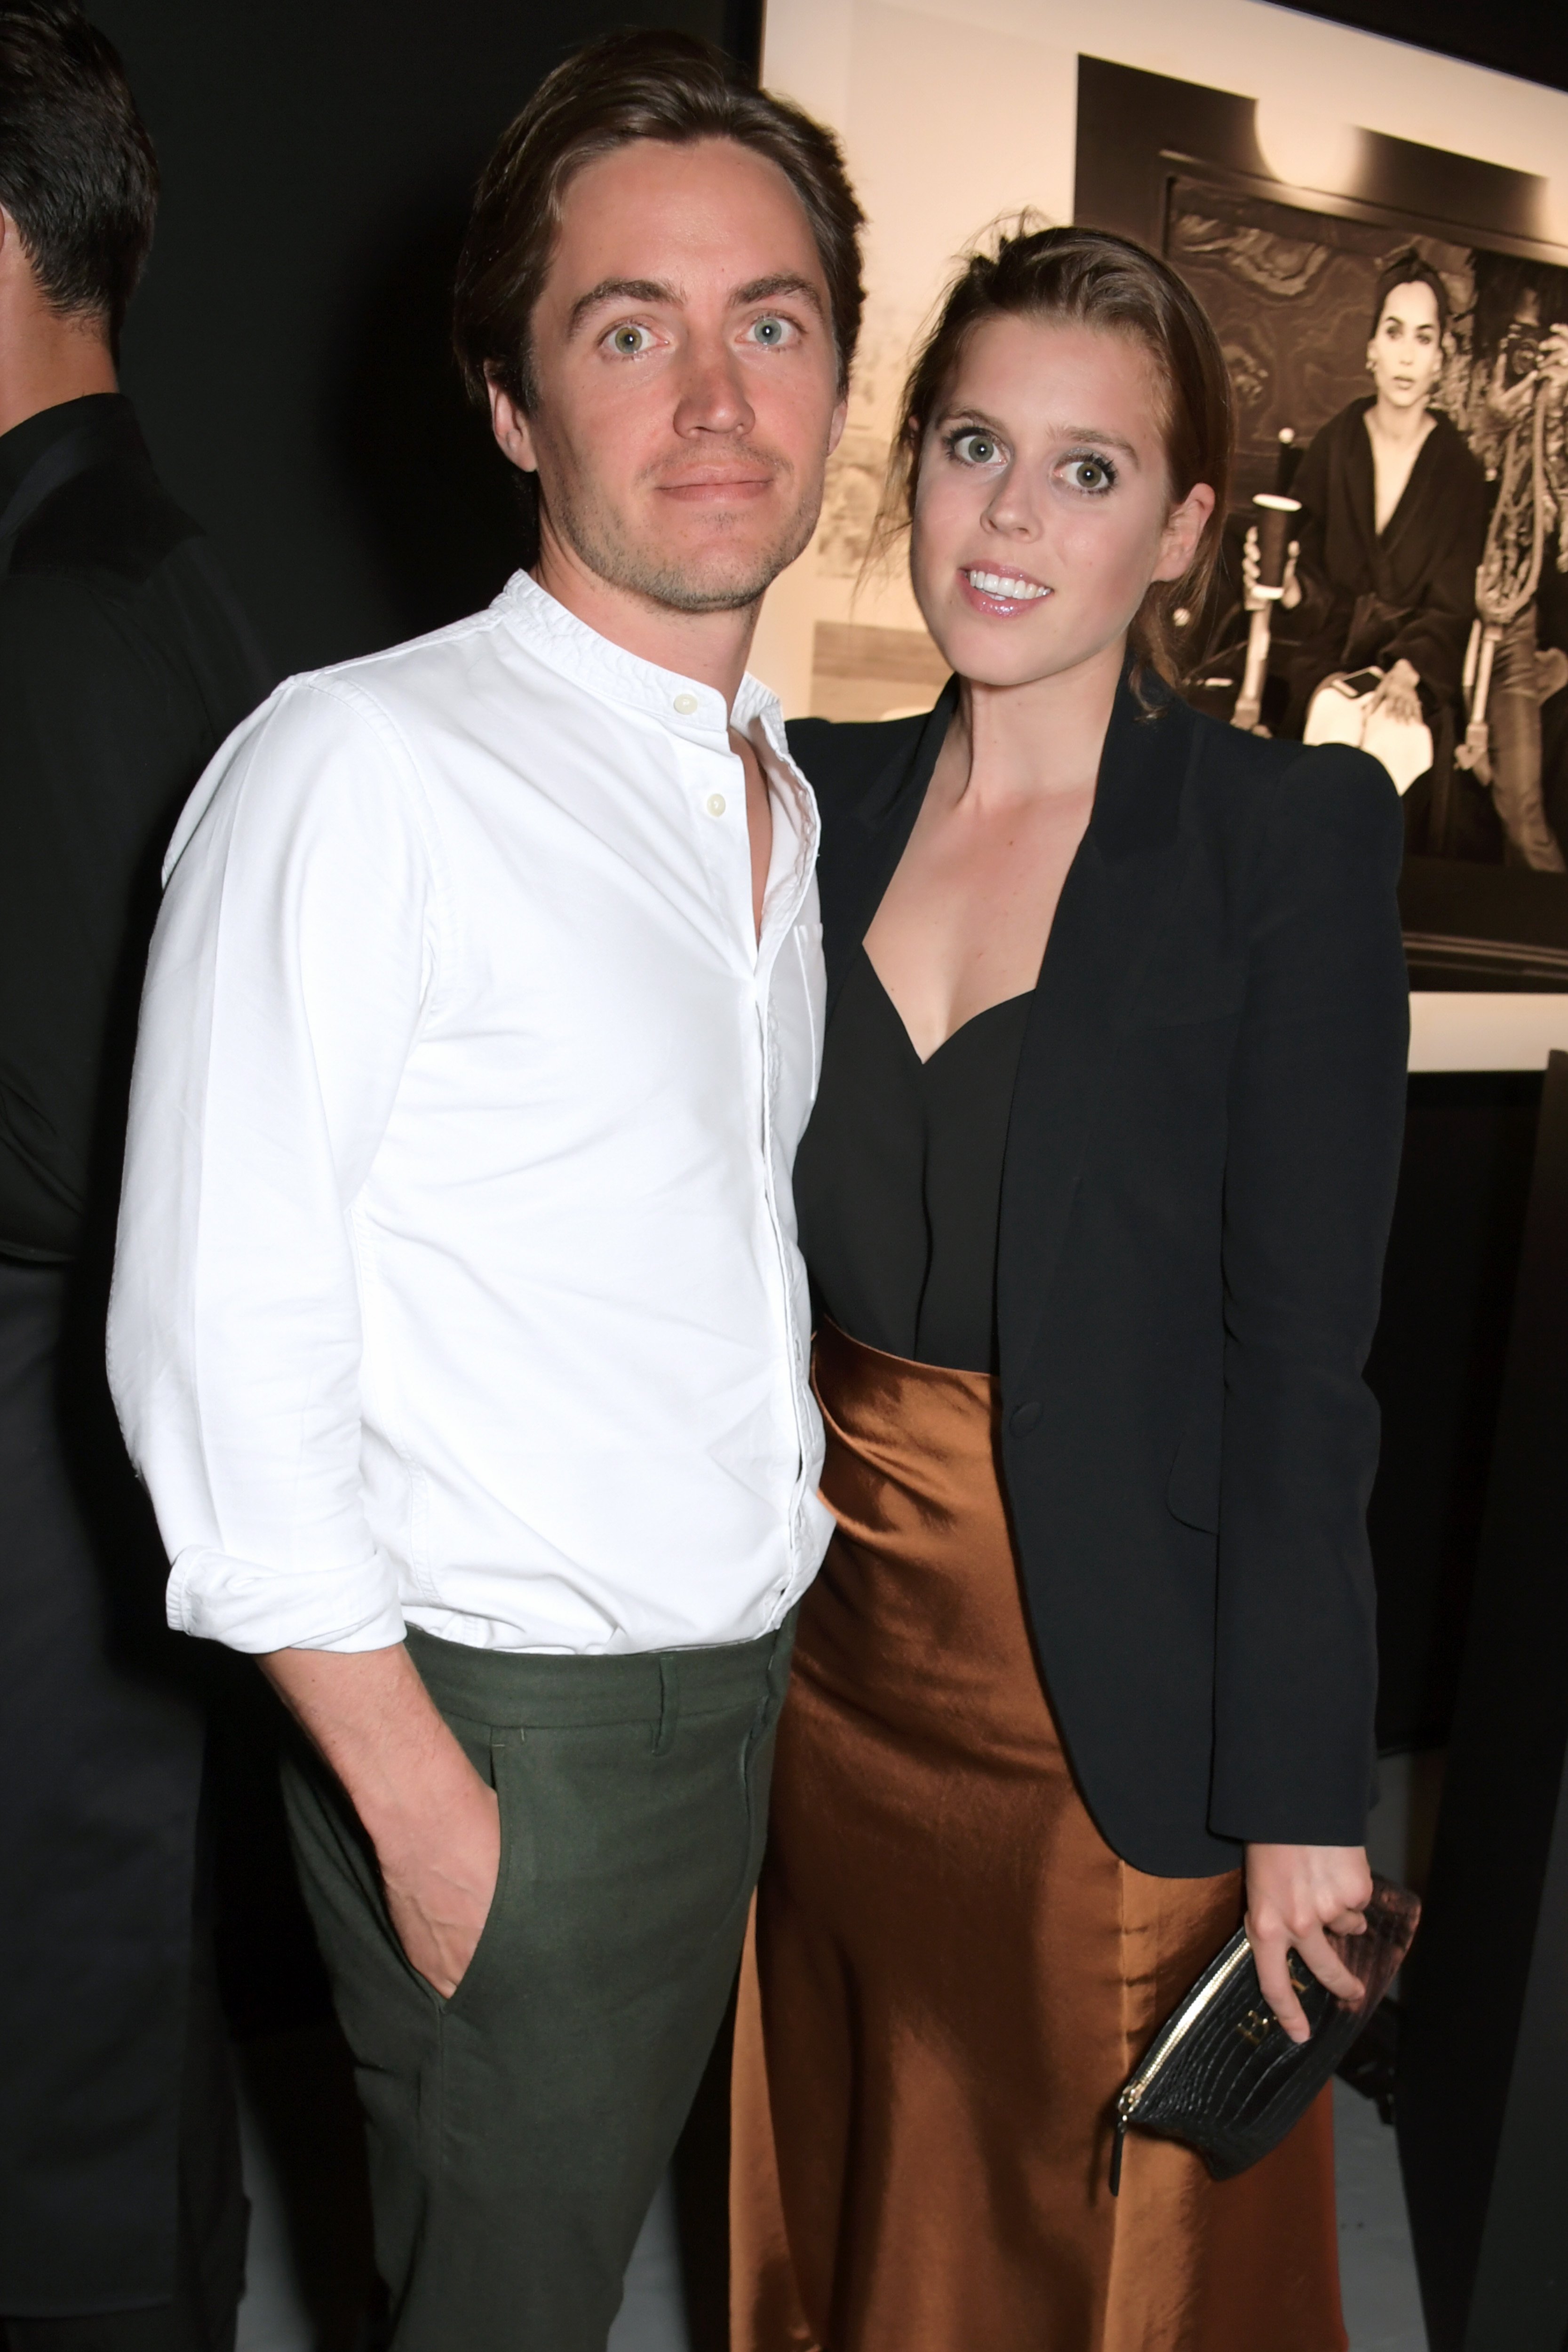 Edoardo Mapelli Mozzi and Princess Beatrice attend an exhibition, on July 10, 2019 in London, England | Photo: Getty Images